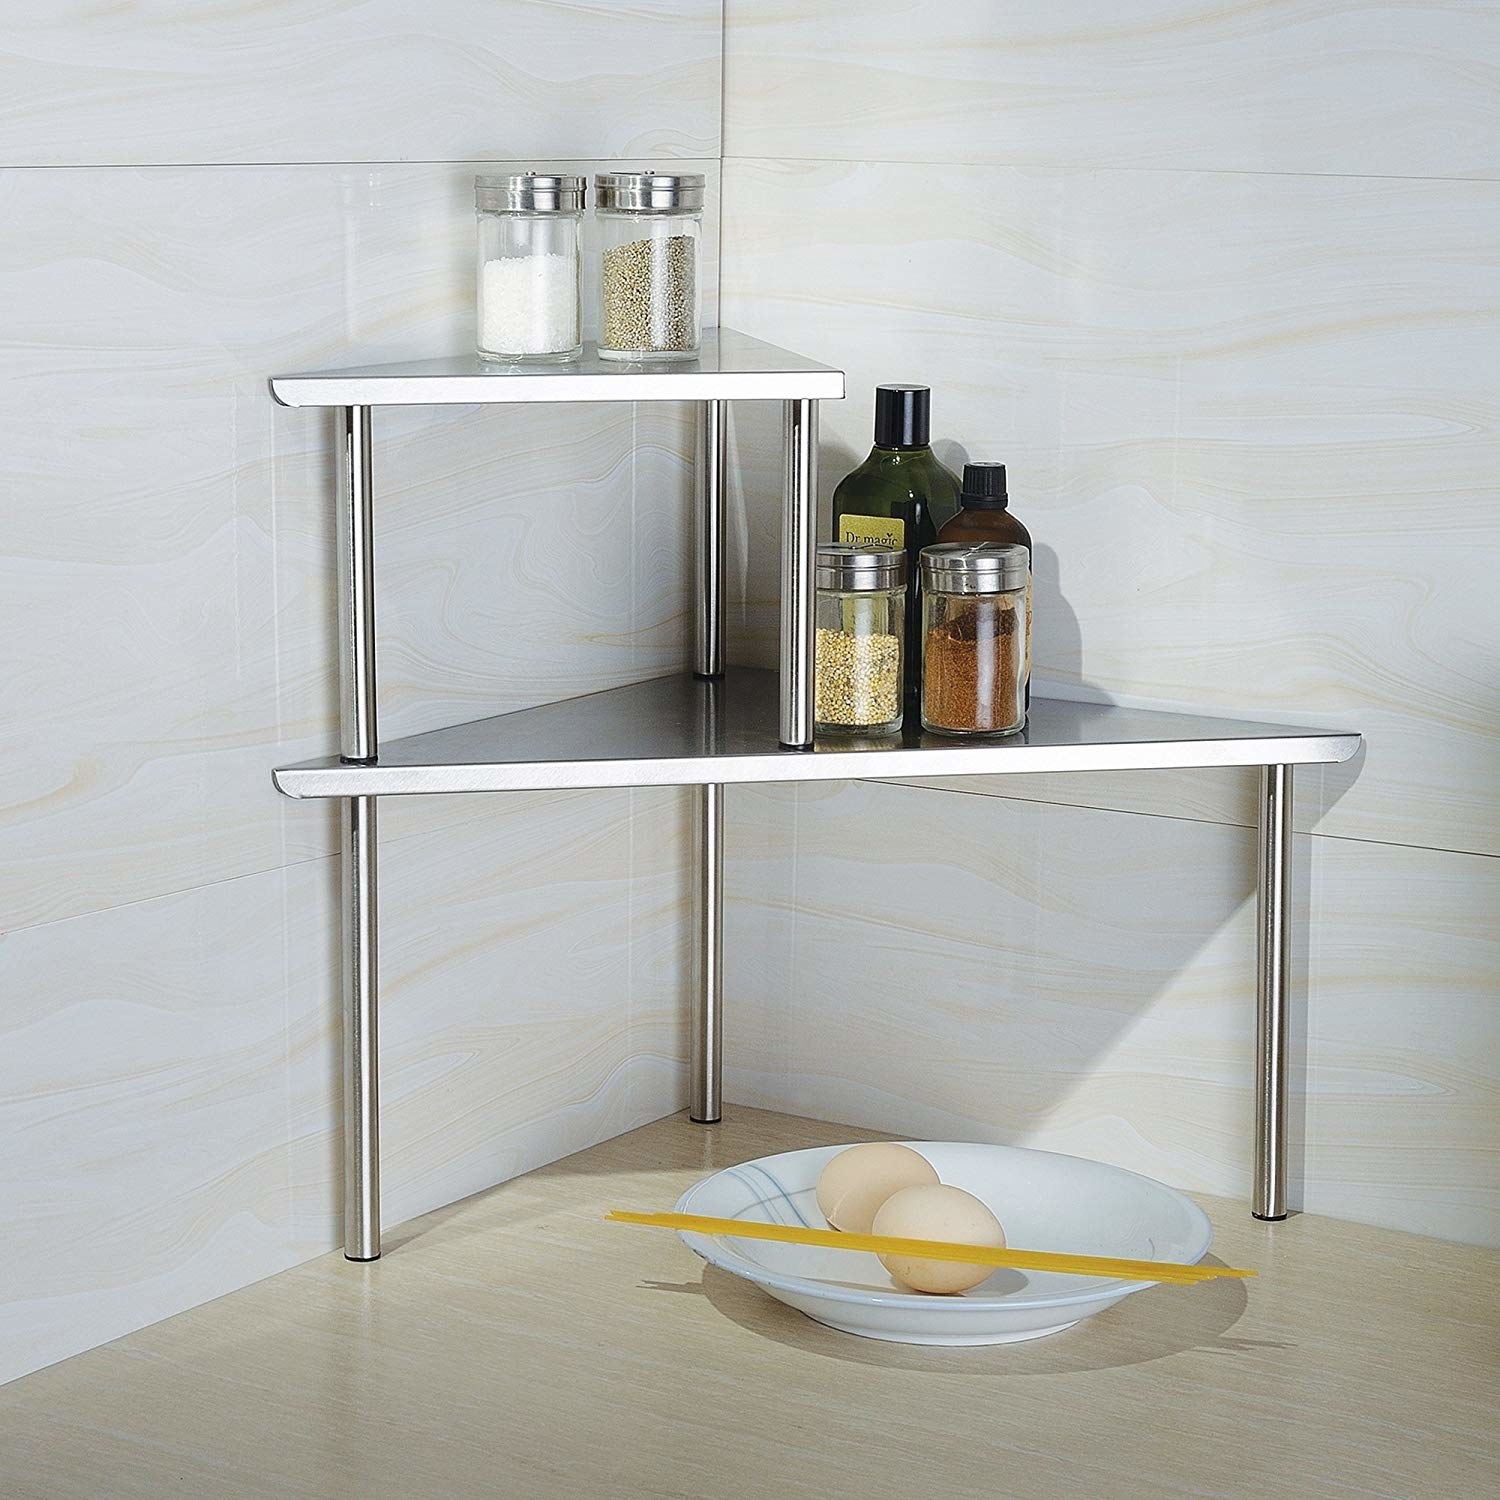 Two-tiered stainless-steel corner shelf with spices and oils displayed 